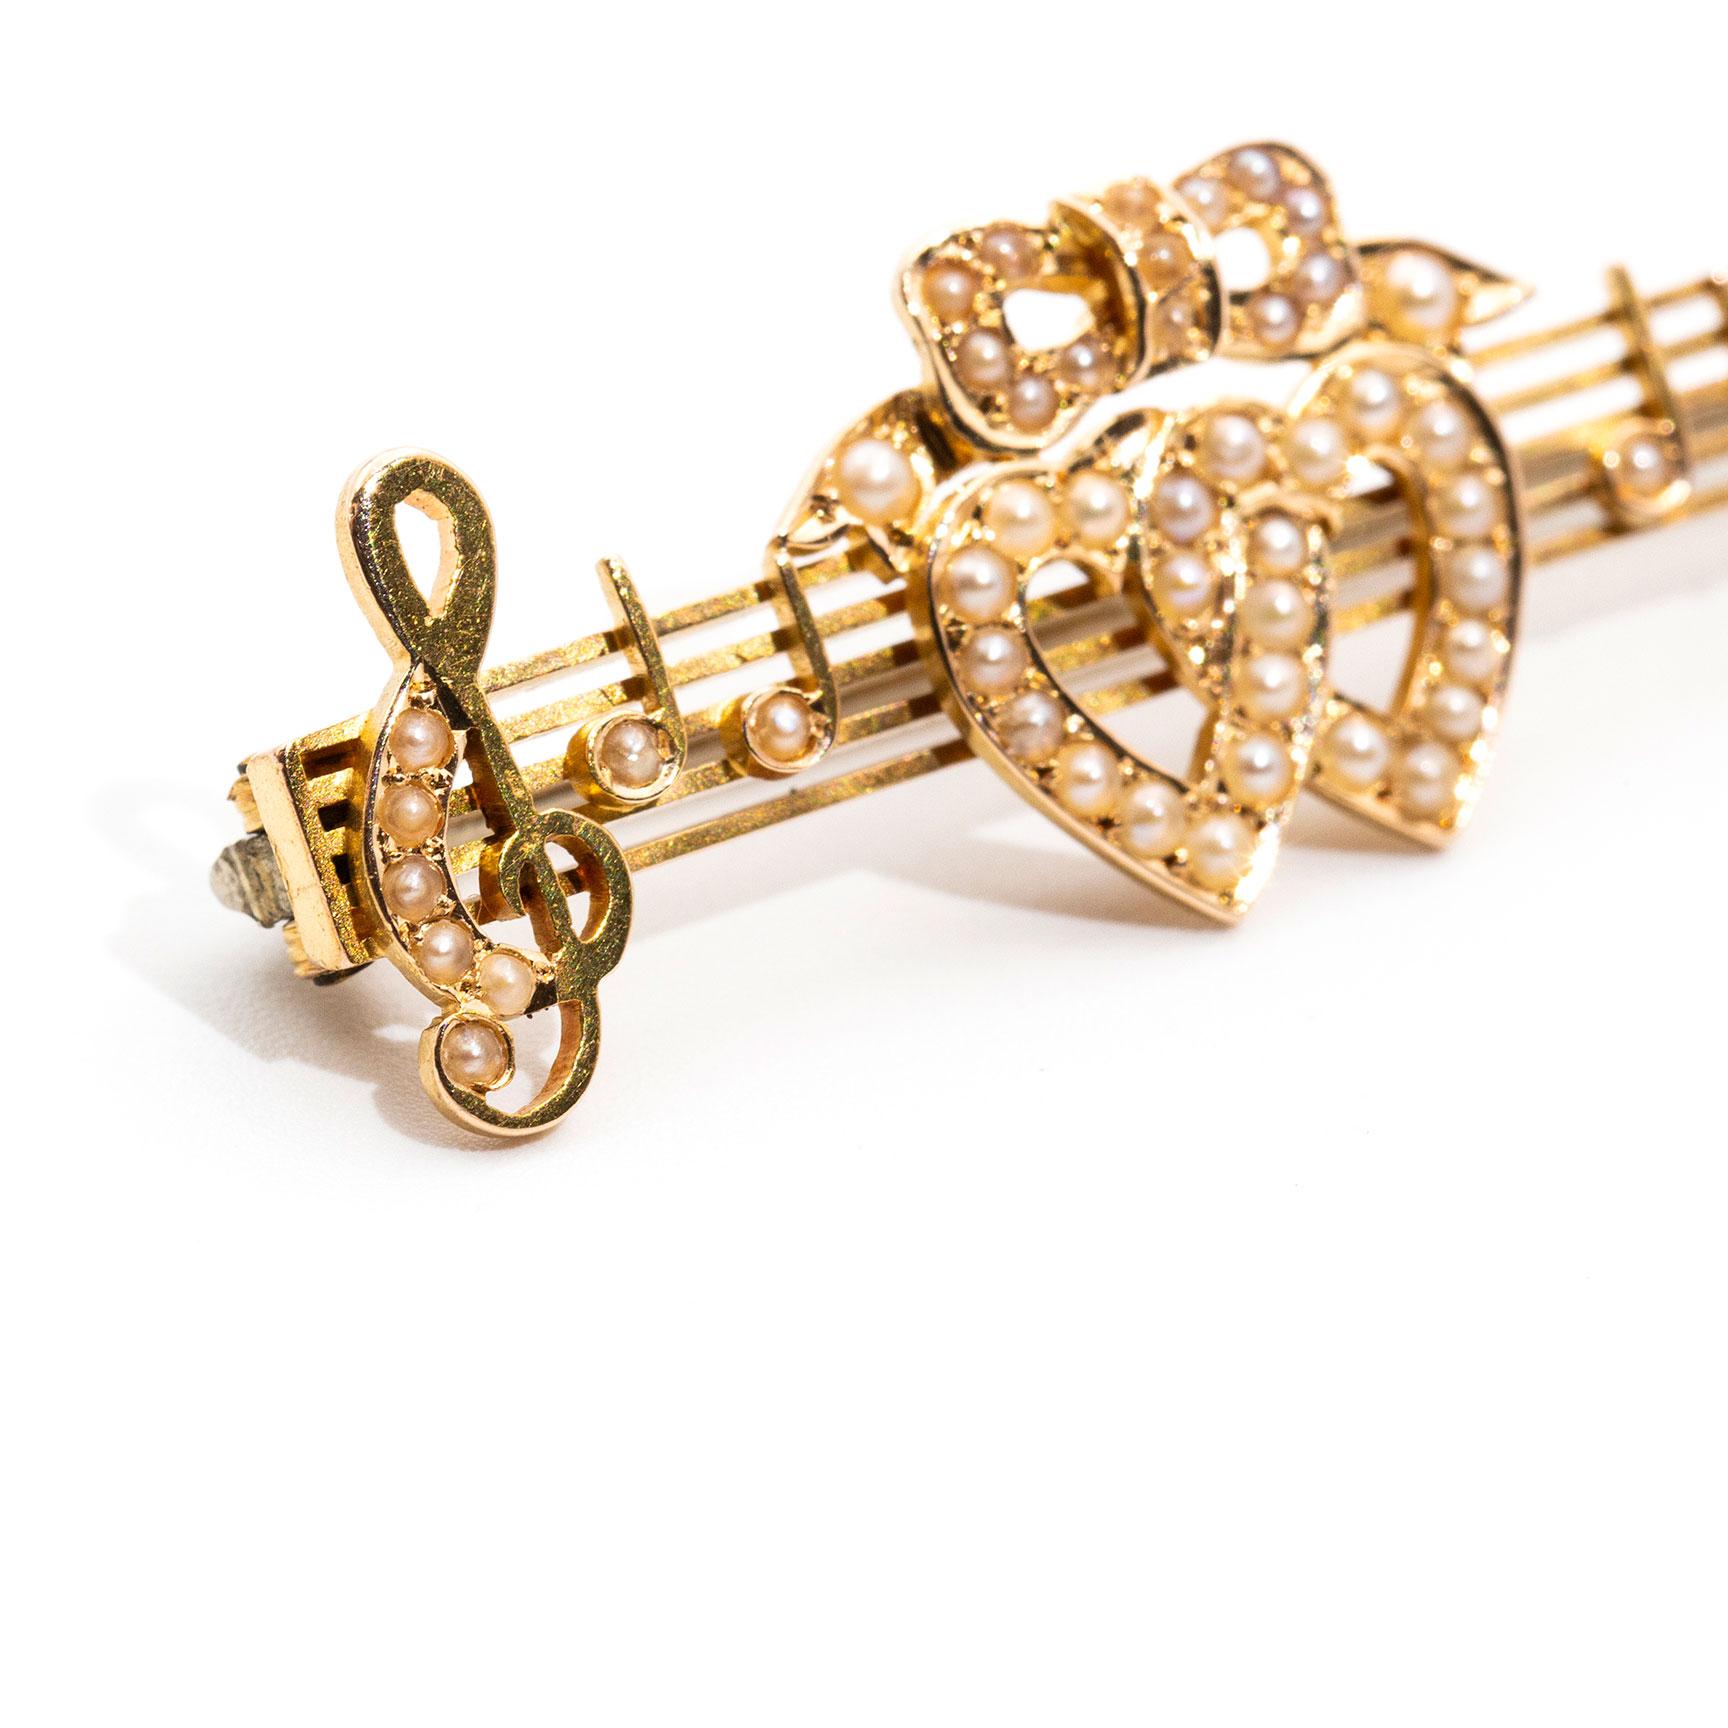 Carefully crafted in 15 yellow gold is this antique Victorian bar brooch, circa 1900s, which features two hearts tied with a bow and carefully set with seed pearls. The tied hearts symbolise the connection of love between two people, being between